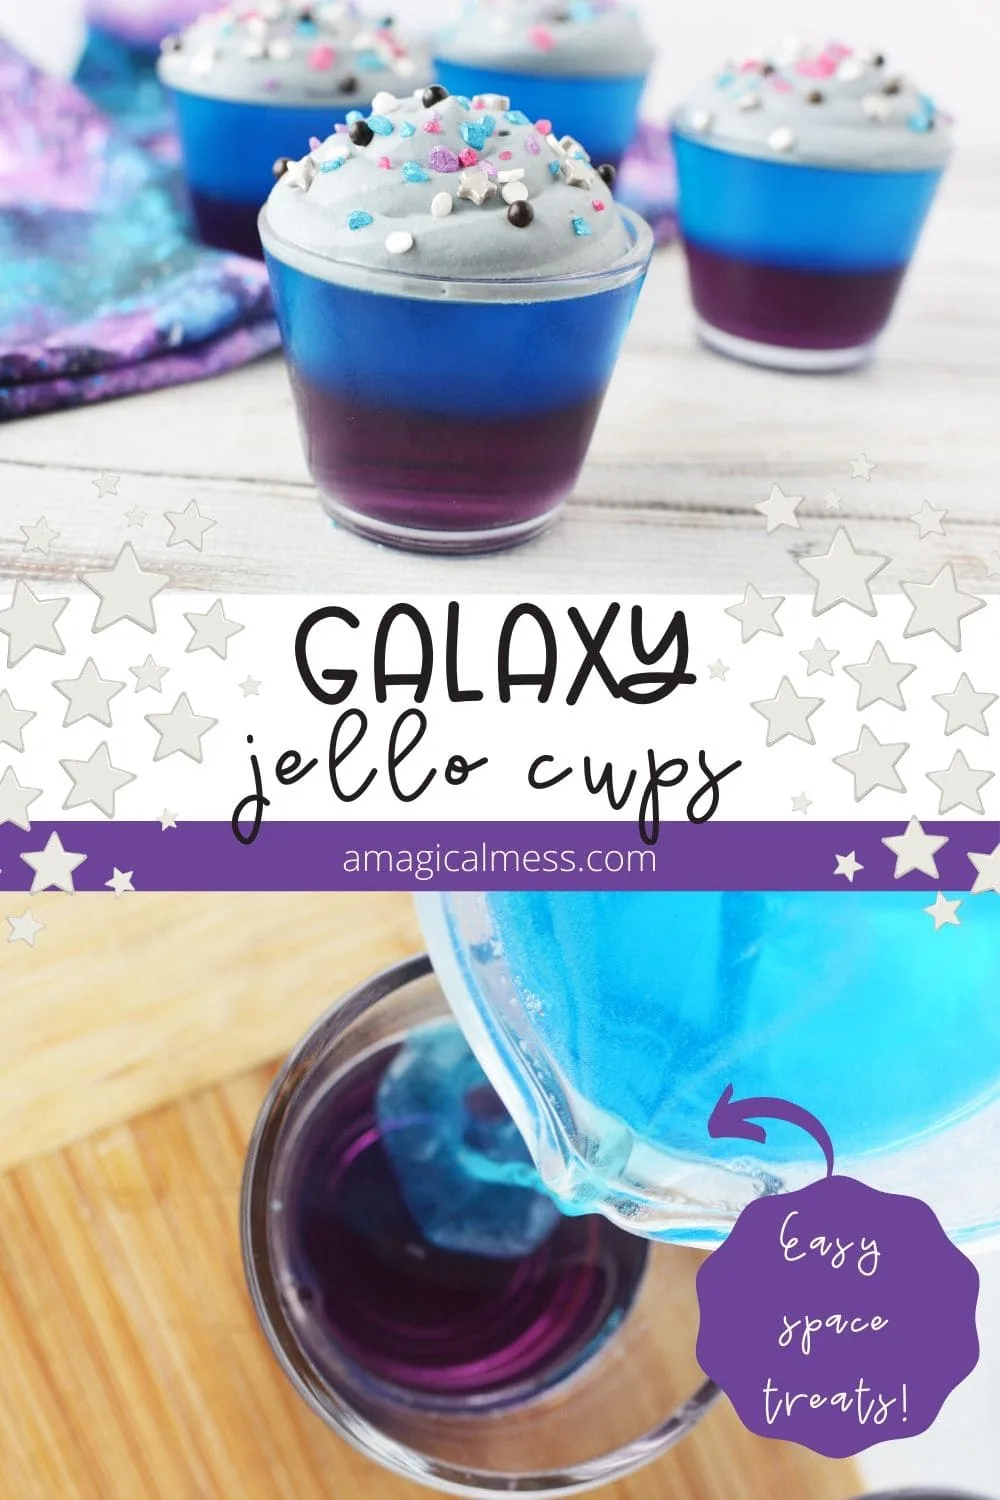 Galaxy jello cups on a table